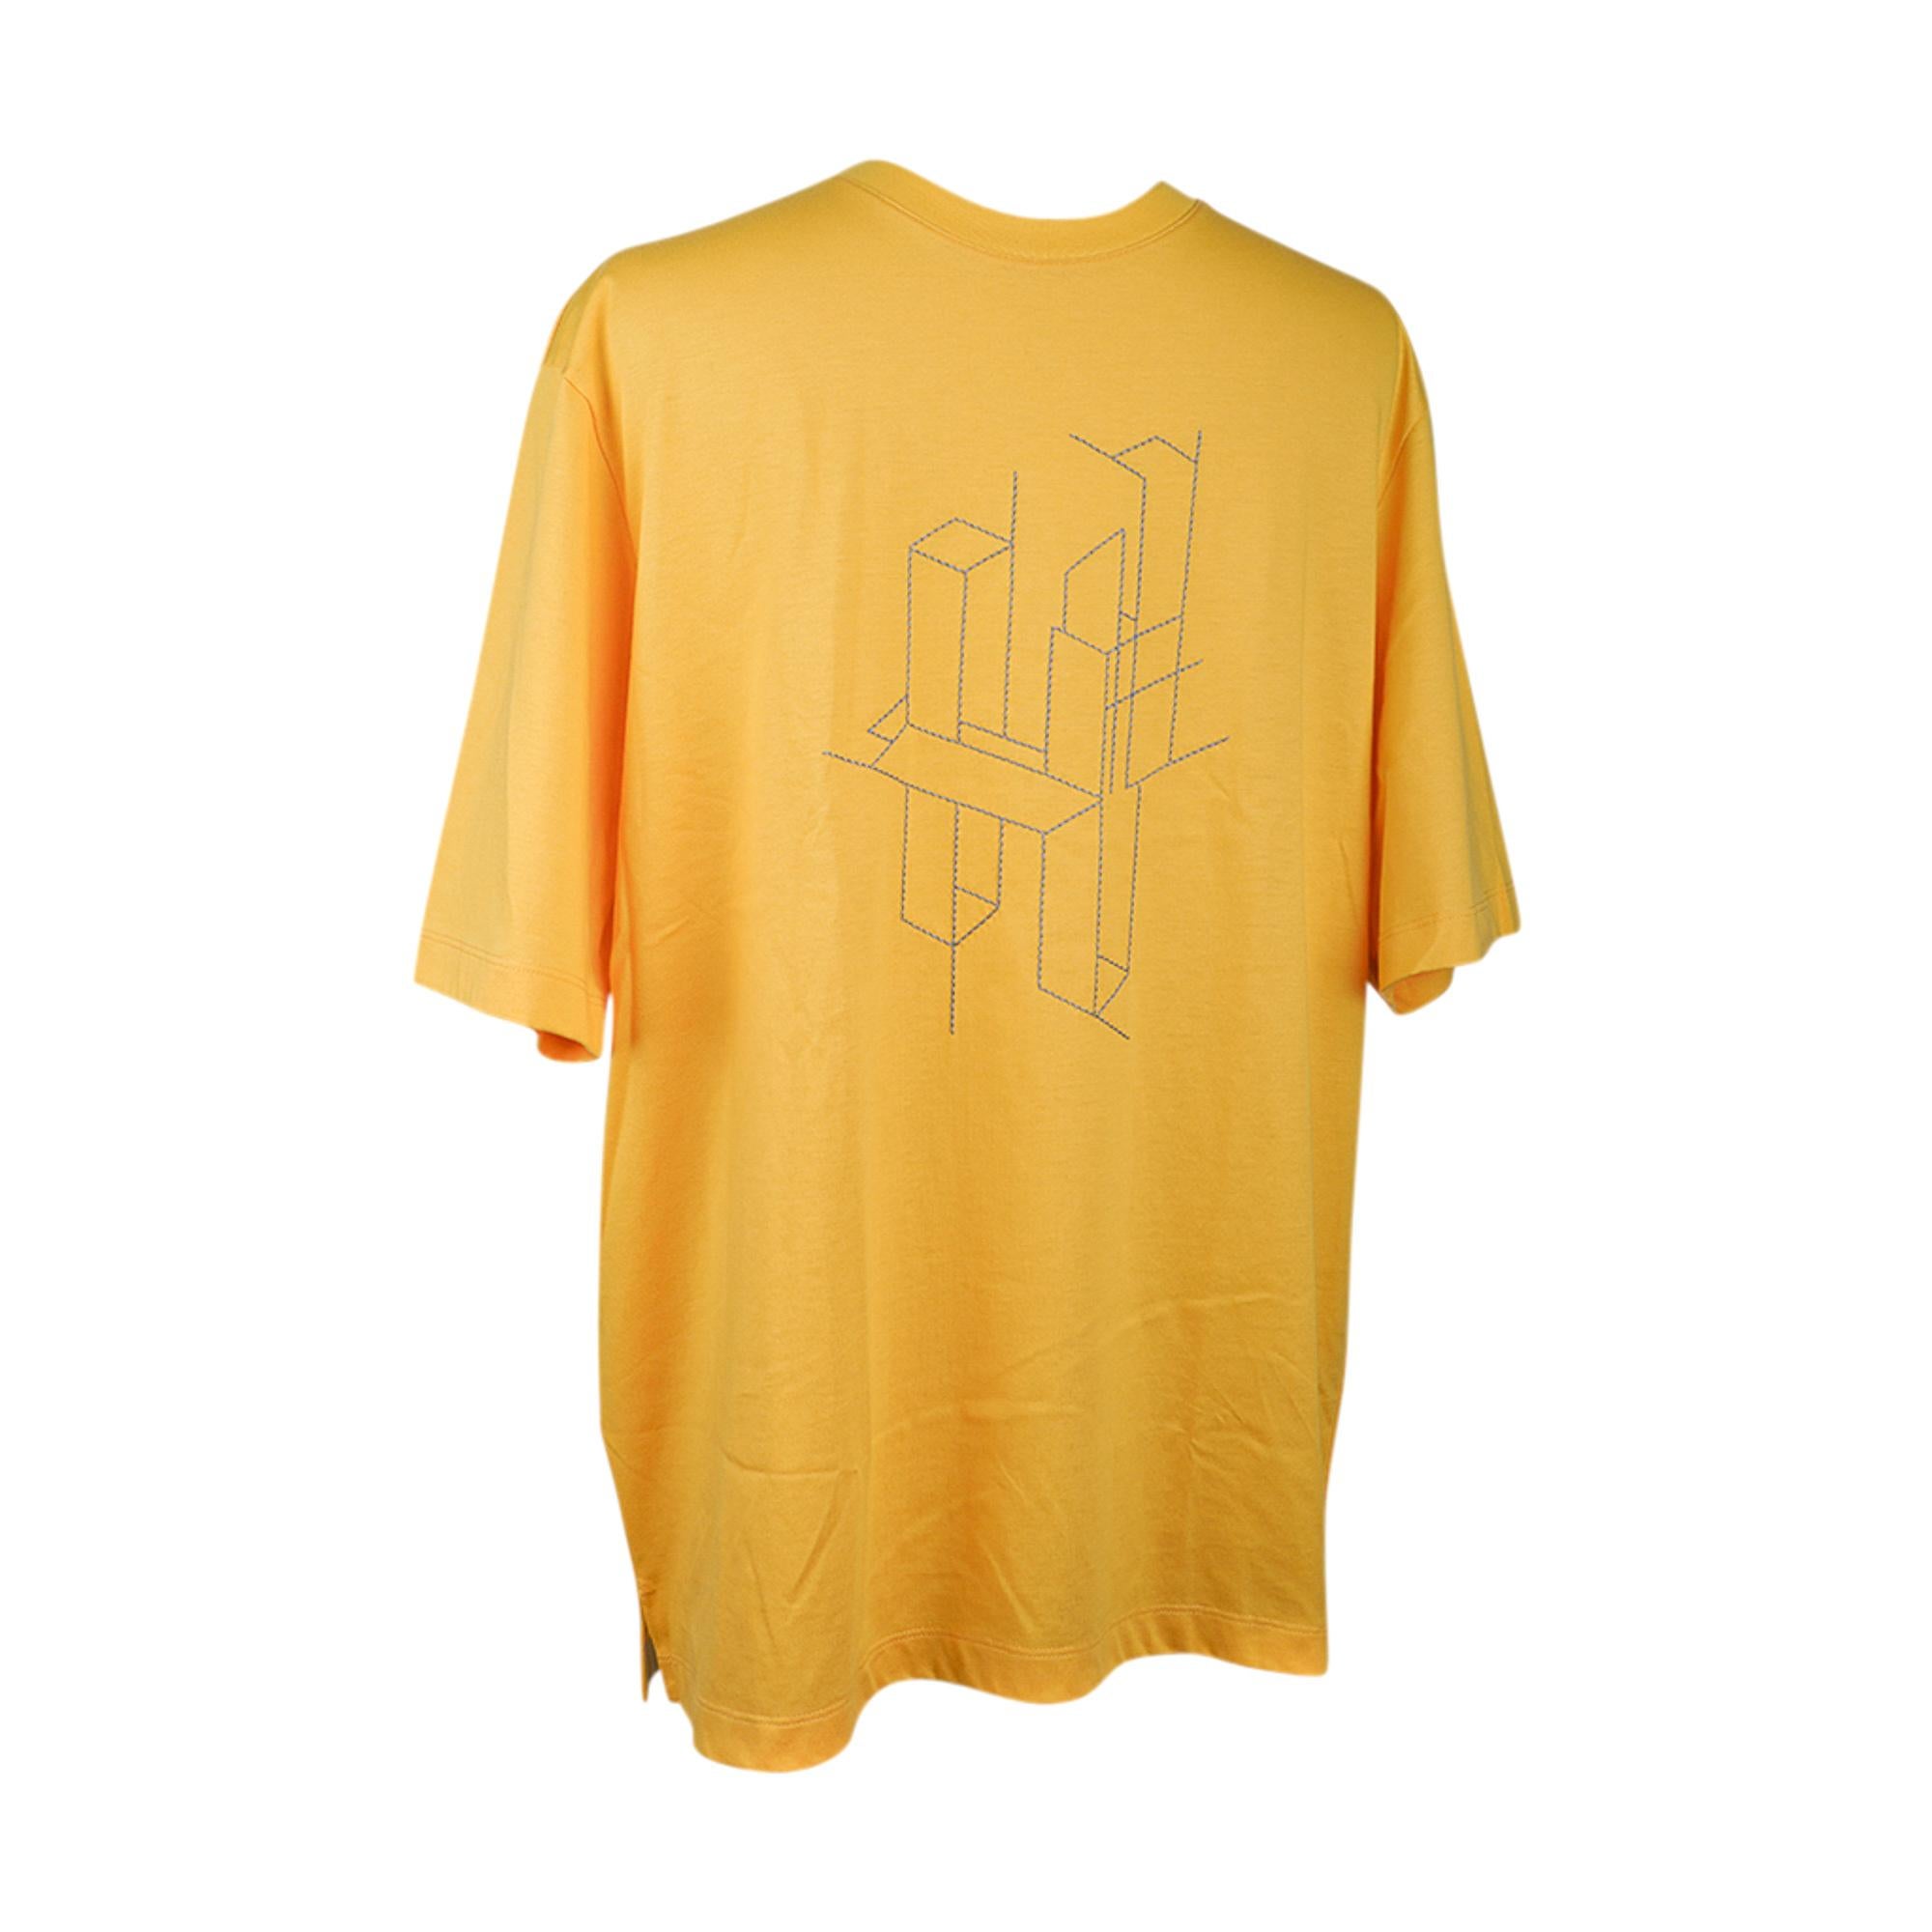 Hermes H 3D Embroidery T-Shirt featured in Hermes Jaune D'Or.
Depicts embroidered H 3D.
Short sleeve T with crew neck.
Fabric is cotton.
NEW or NEVER WORN.
final sale

SIZE M

TOP MEASURES:
LENGTH 28.5